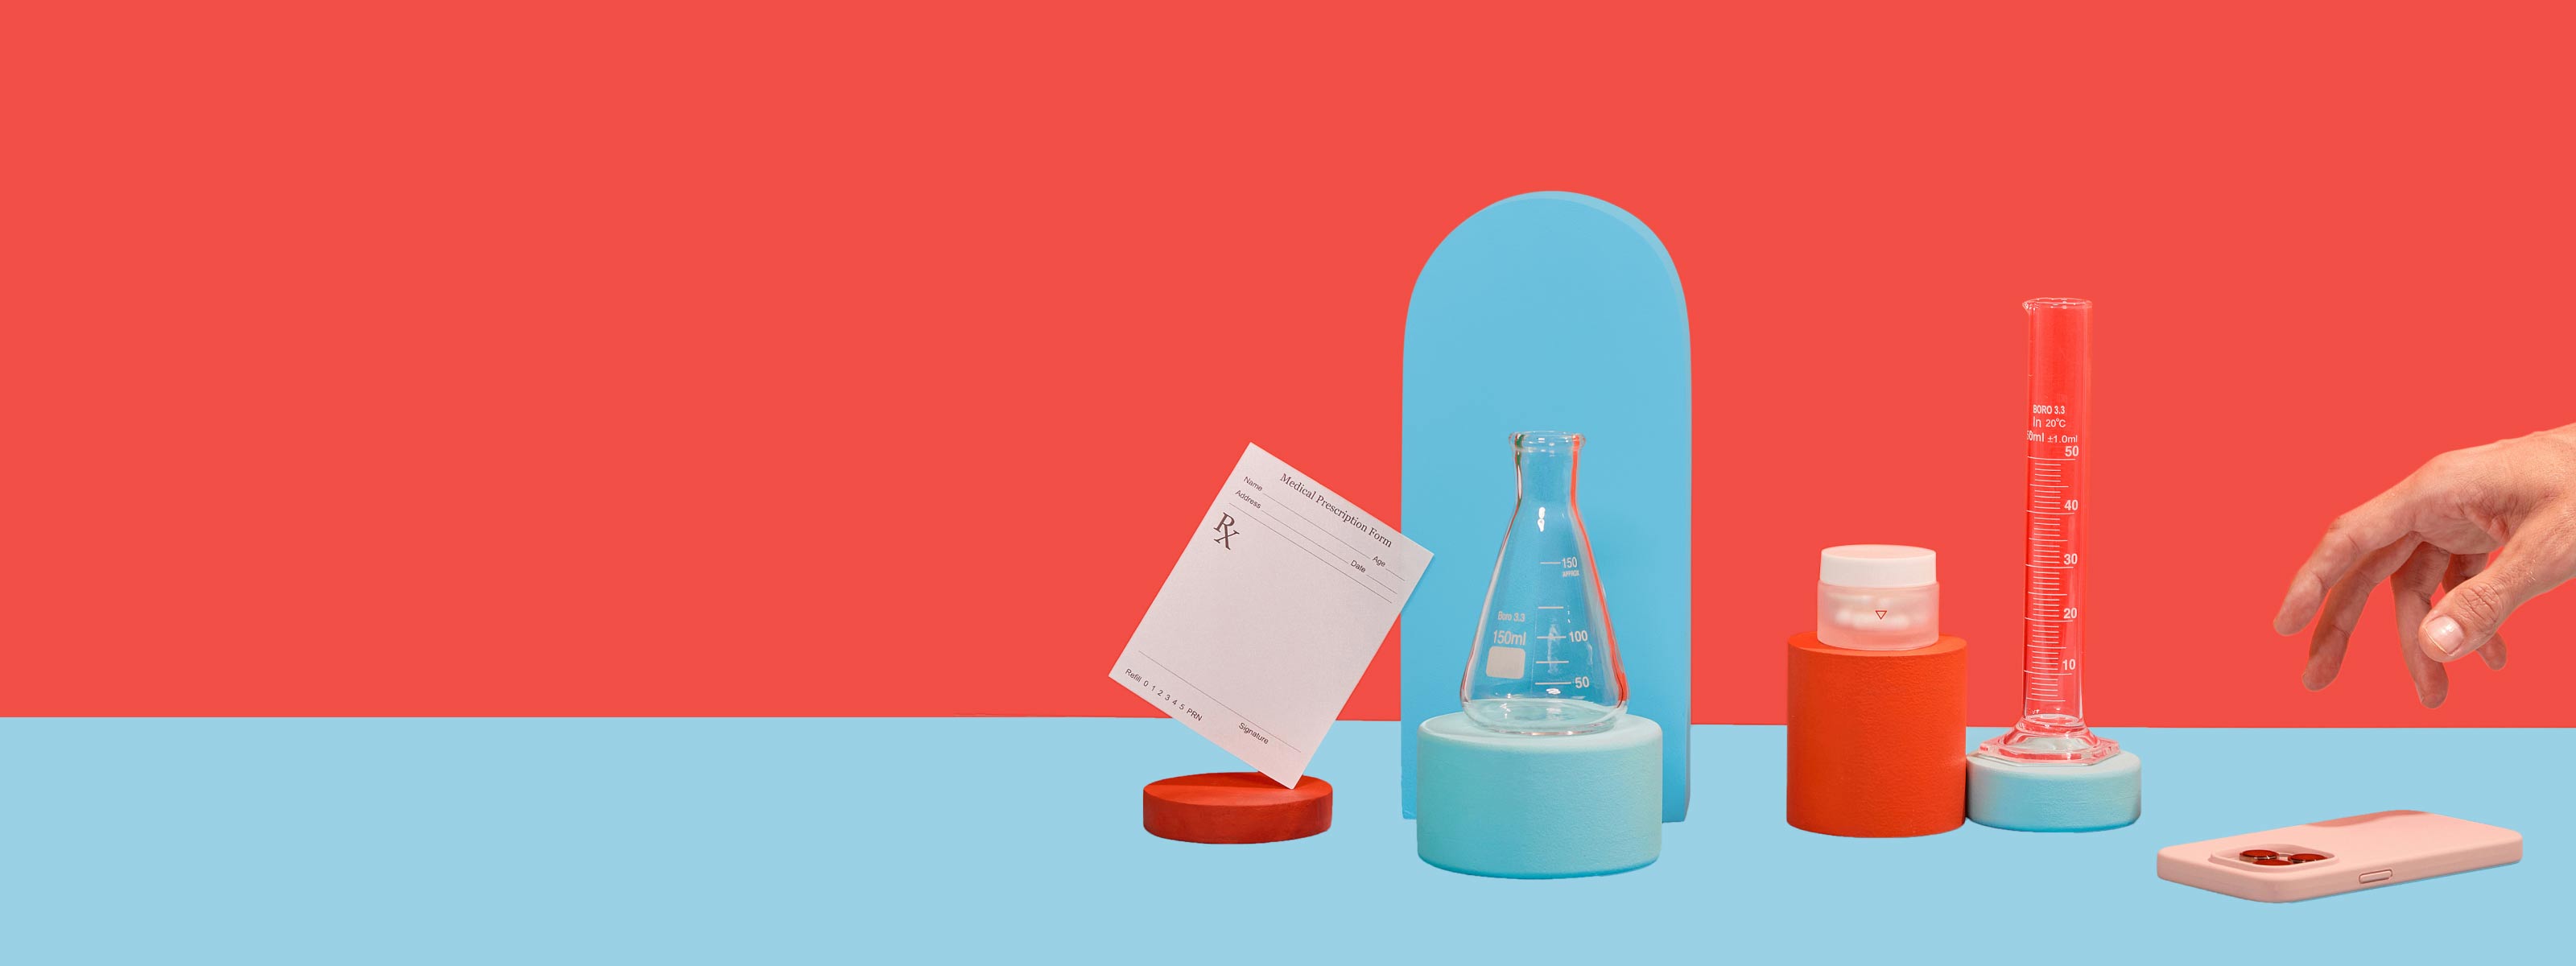 Man's hand reaches for phone sitting next to lab slip, reproductive health medications, and test tubes on colorful geometric background